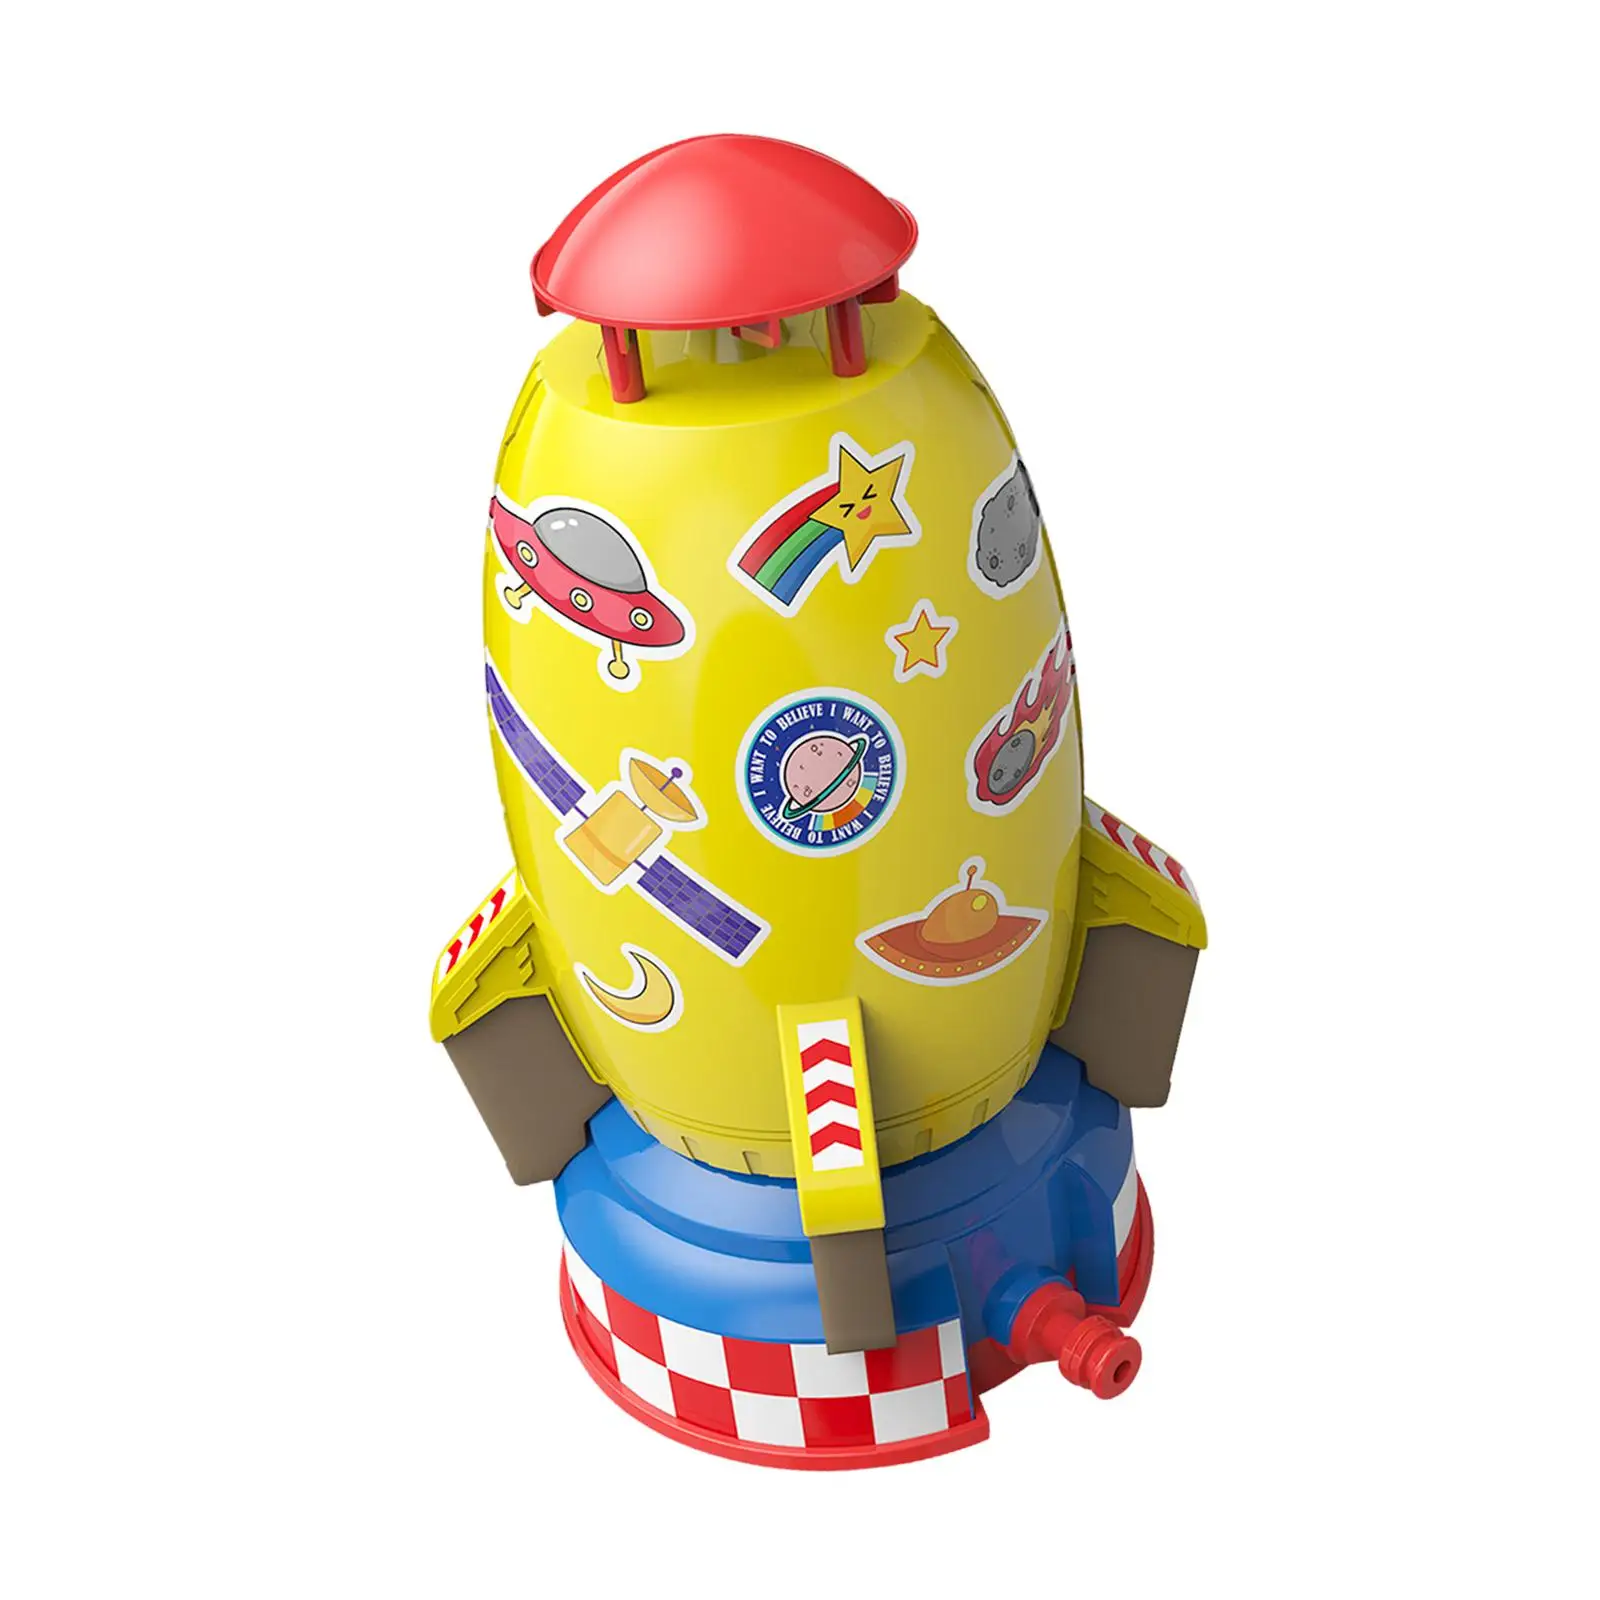 Bathtub Game Space Rocket shape Lawn Water Spray Toy for Kids baby gifts